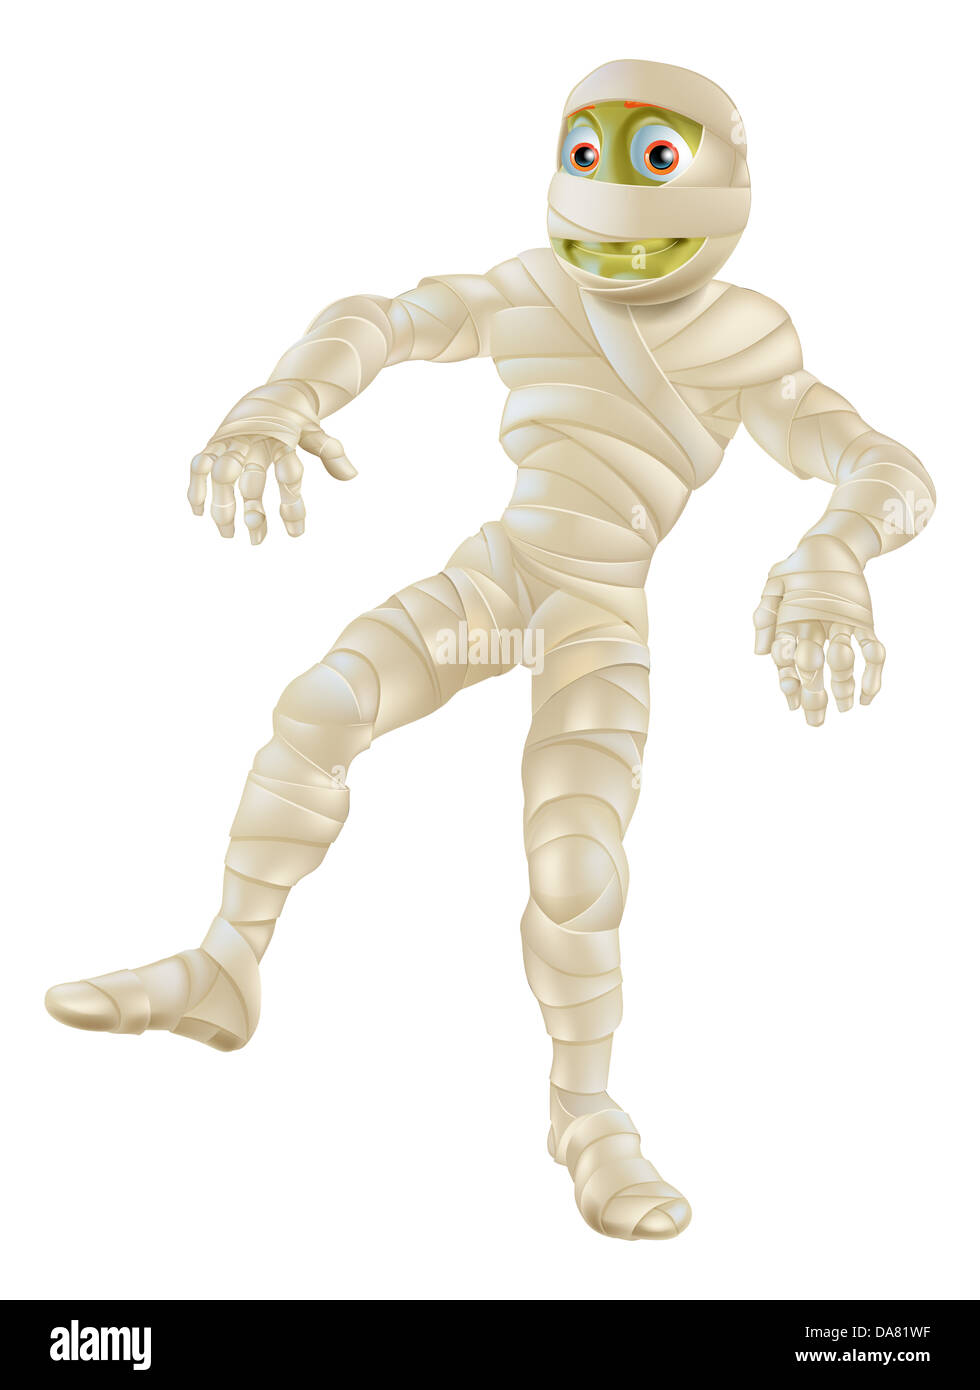 An illustration of a cartoon Halloween mummy character in bandages Stock Photo